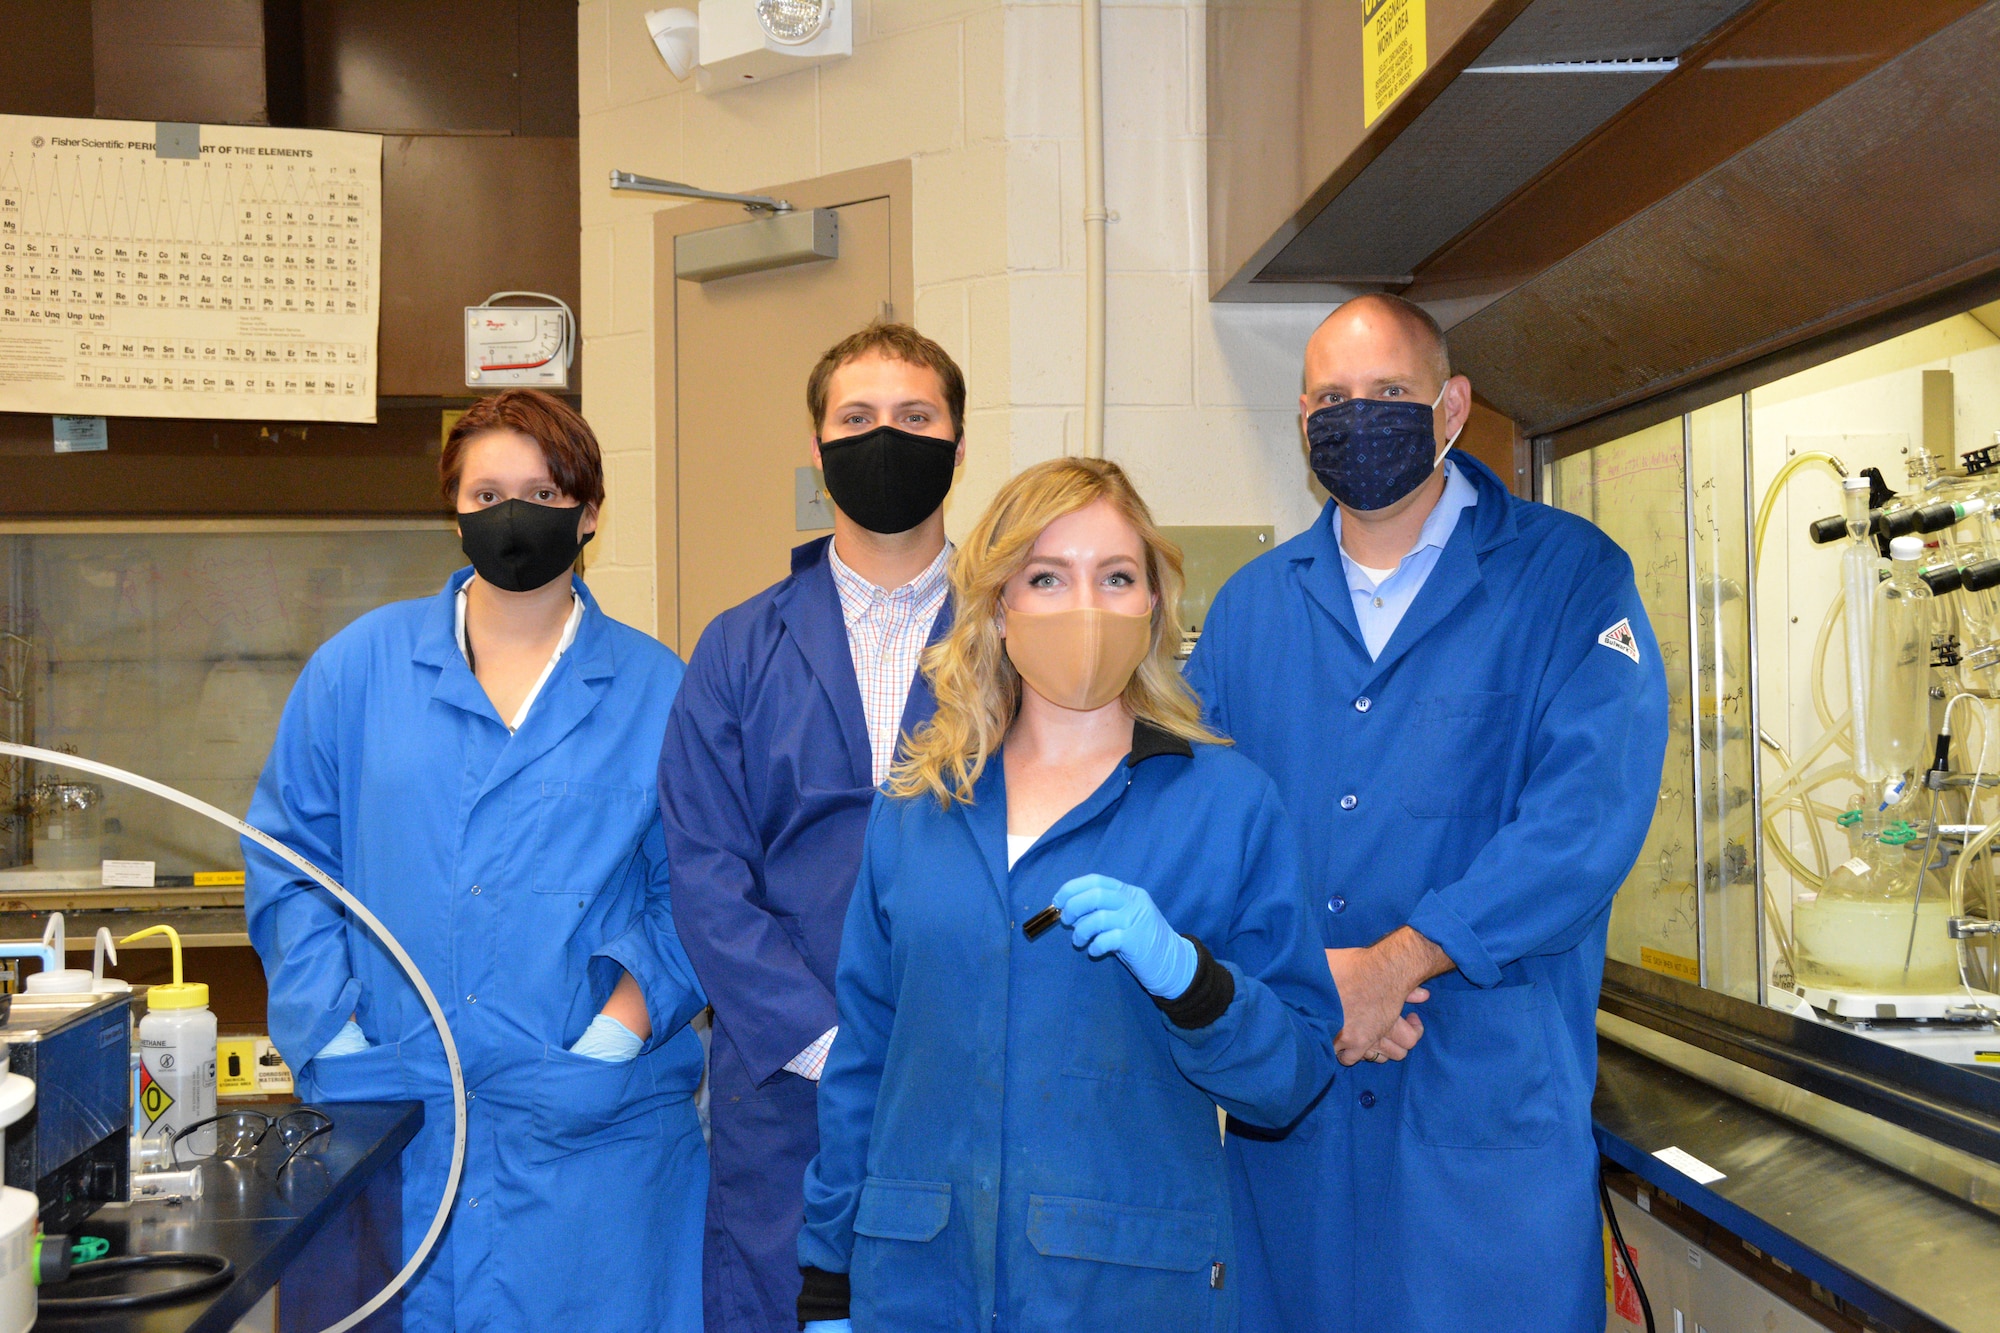 Members of the Ceramic Materials and Processing Research Team, from left to right: Ms. Christina Thompson, Dr. Dayton Street, Dr. Kara Martin and Dr. Matthew Dickerson. (U.S. Air Force photo/Karen Schlesinger)